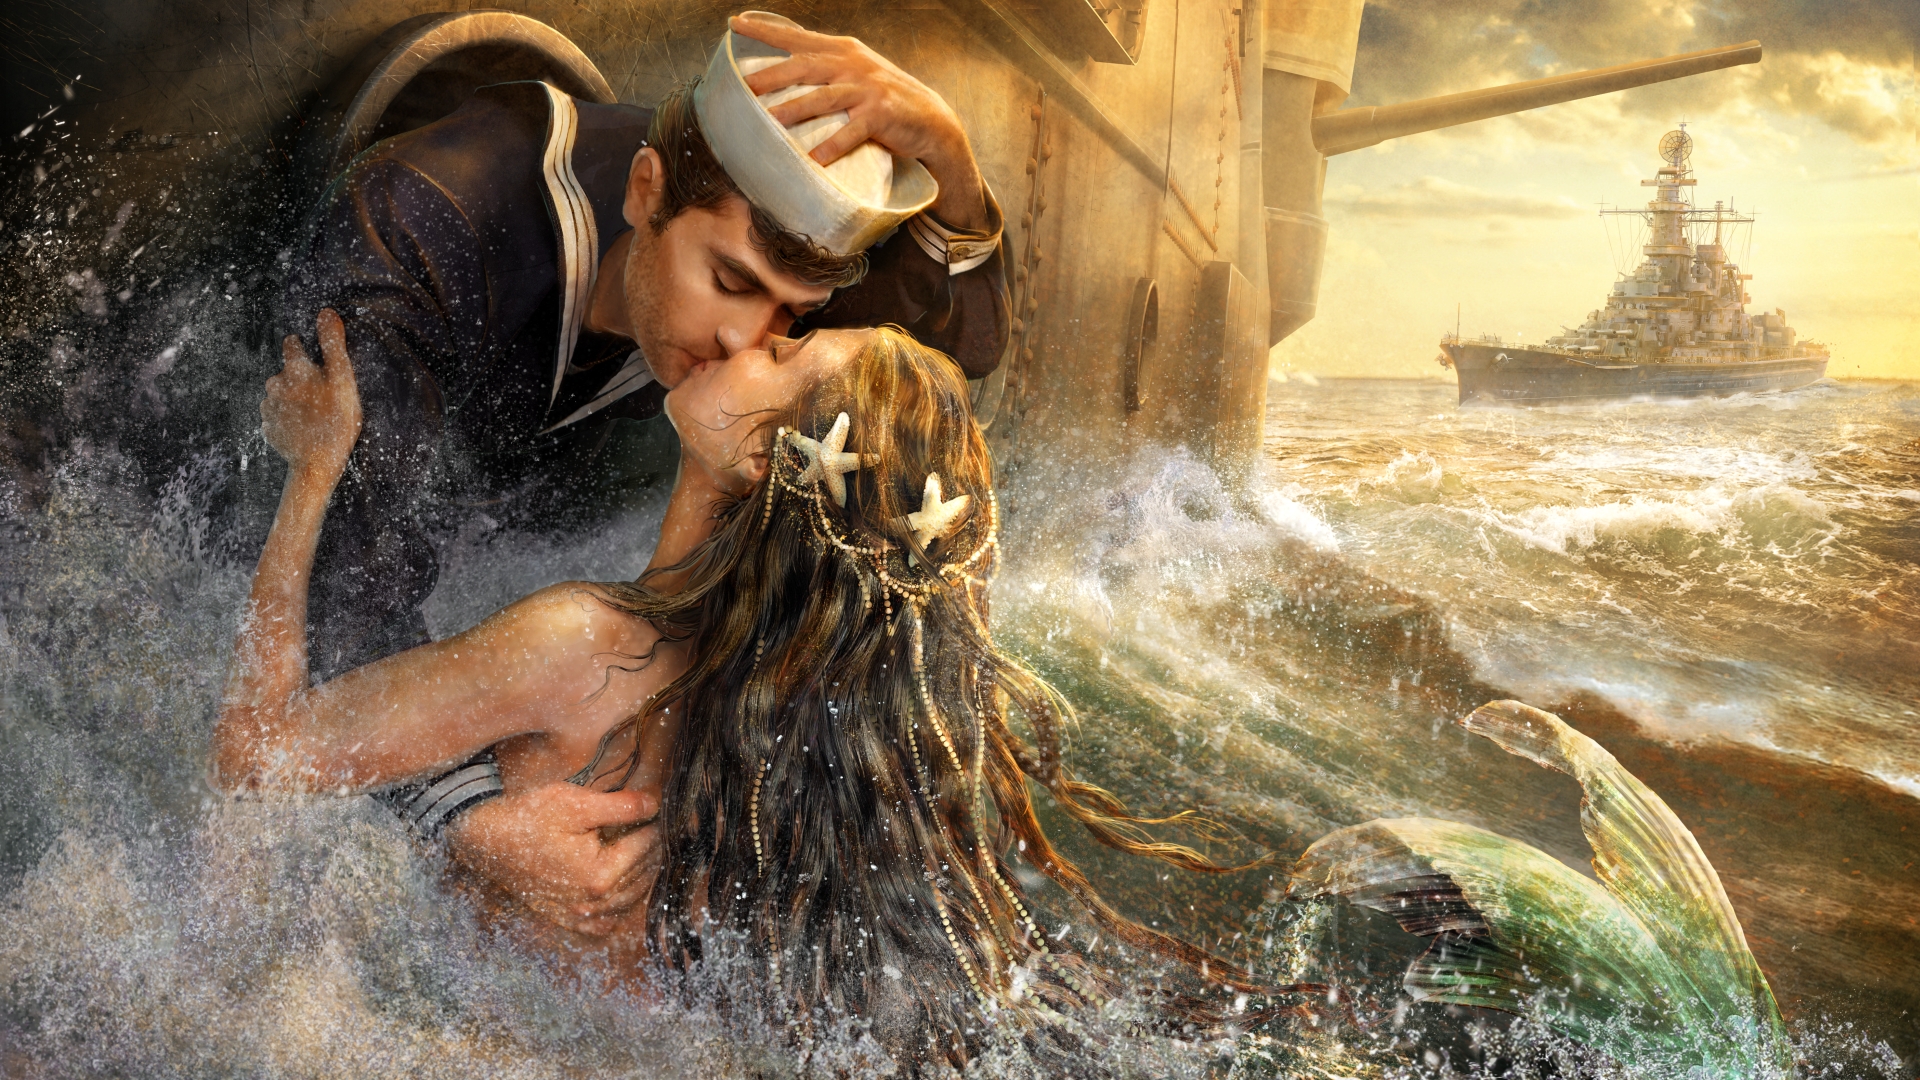 Kissing a siren Wallpaper from World of Warships